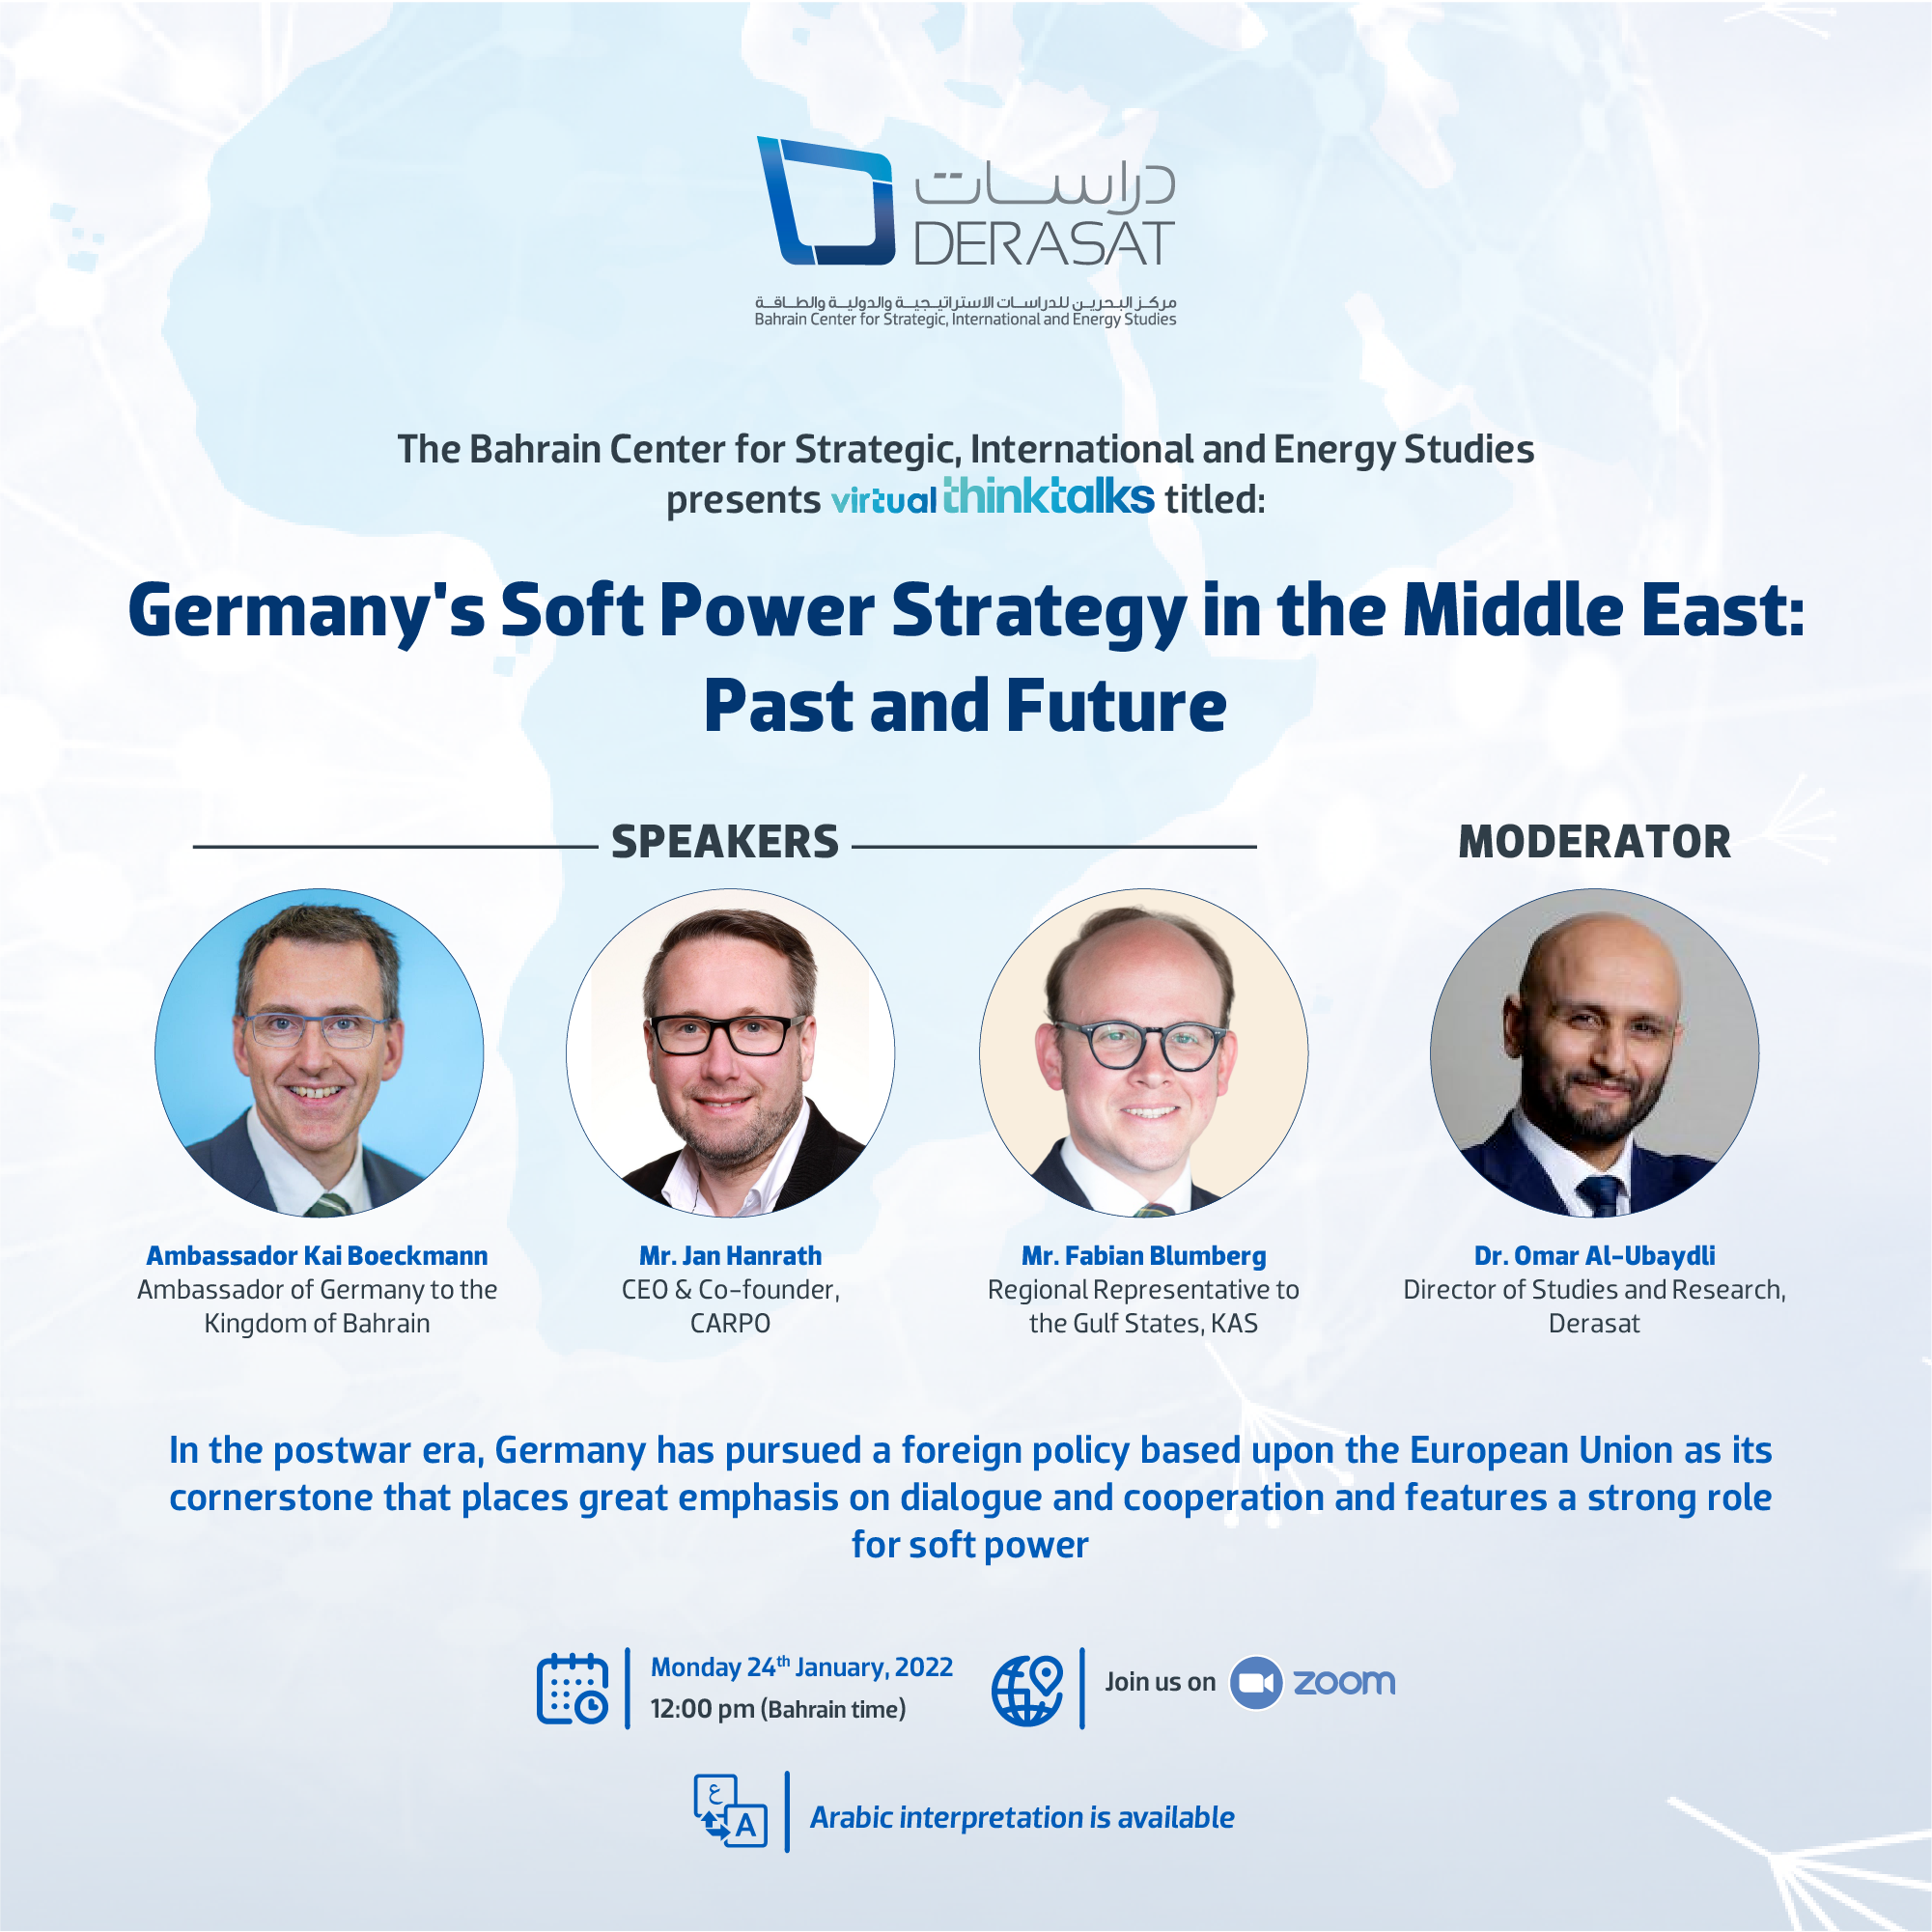 Germany’s Soft Power Strategy in the Middle East: Past & Future